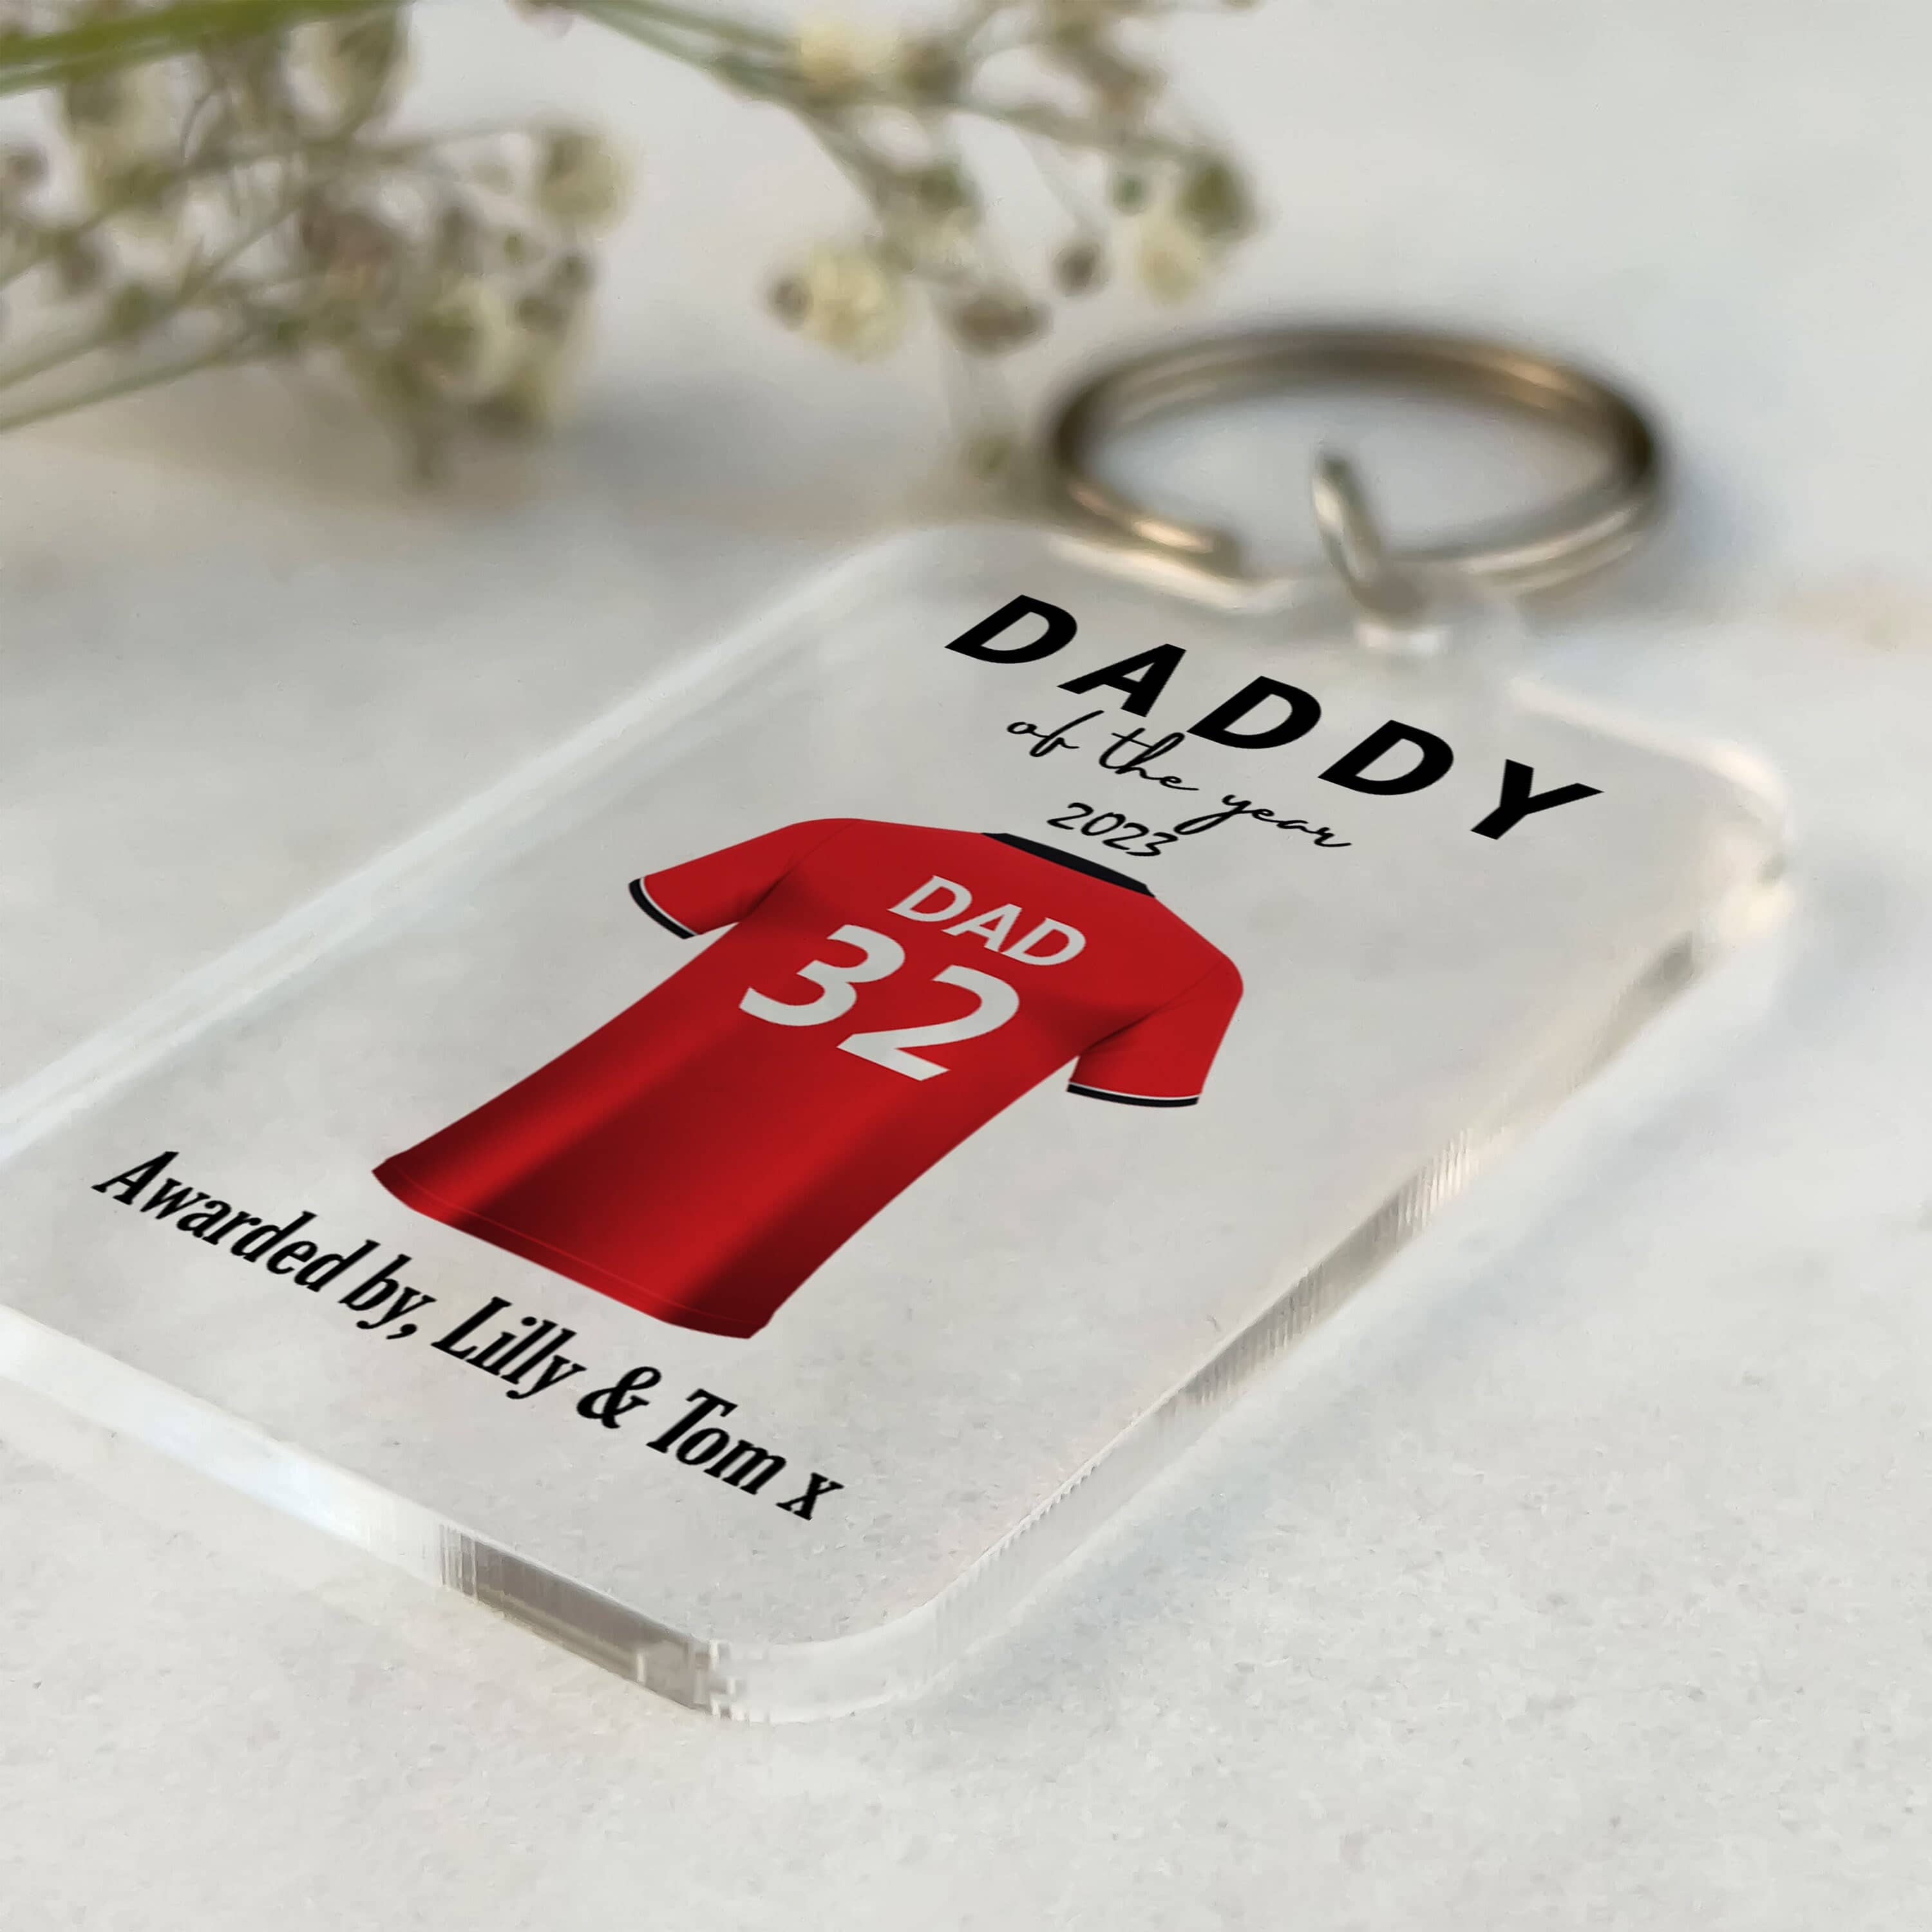 Dad Gifts Keyring, Football Shirt Keychain gifts, Father's Day Gift, Birthday Gift for Him, Personalised Football Gift, Best Daddy, Grandad